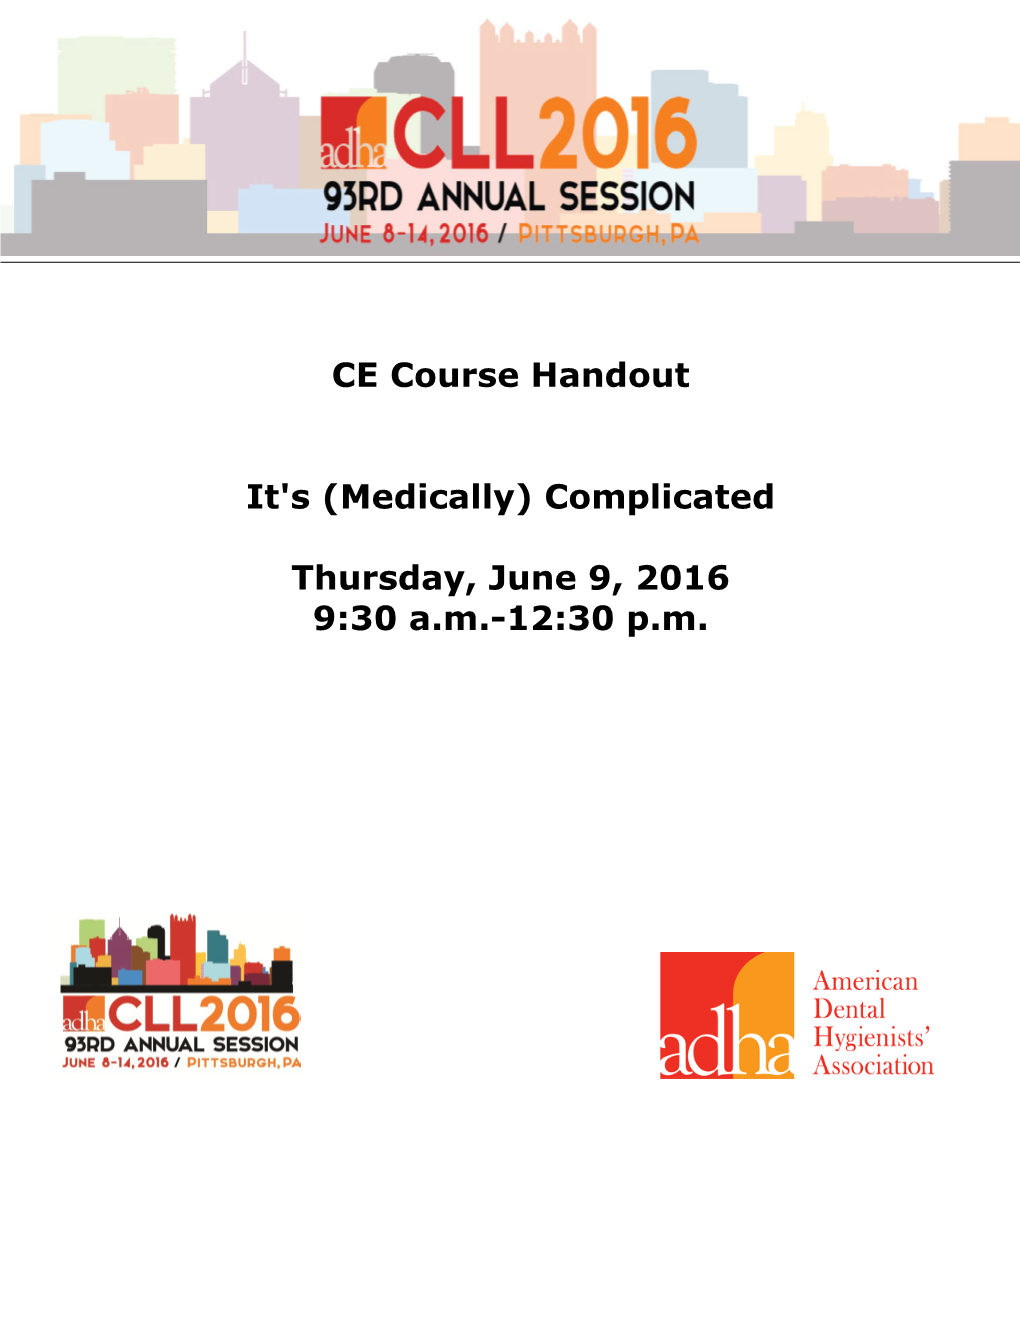 (Medically) Complicated Thursday, June 9, 2016 9:30 Am-12:30 Pm